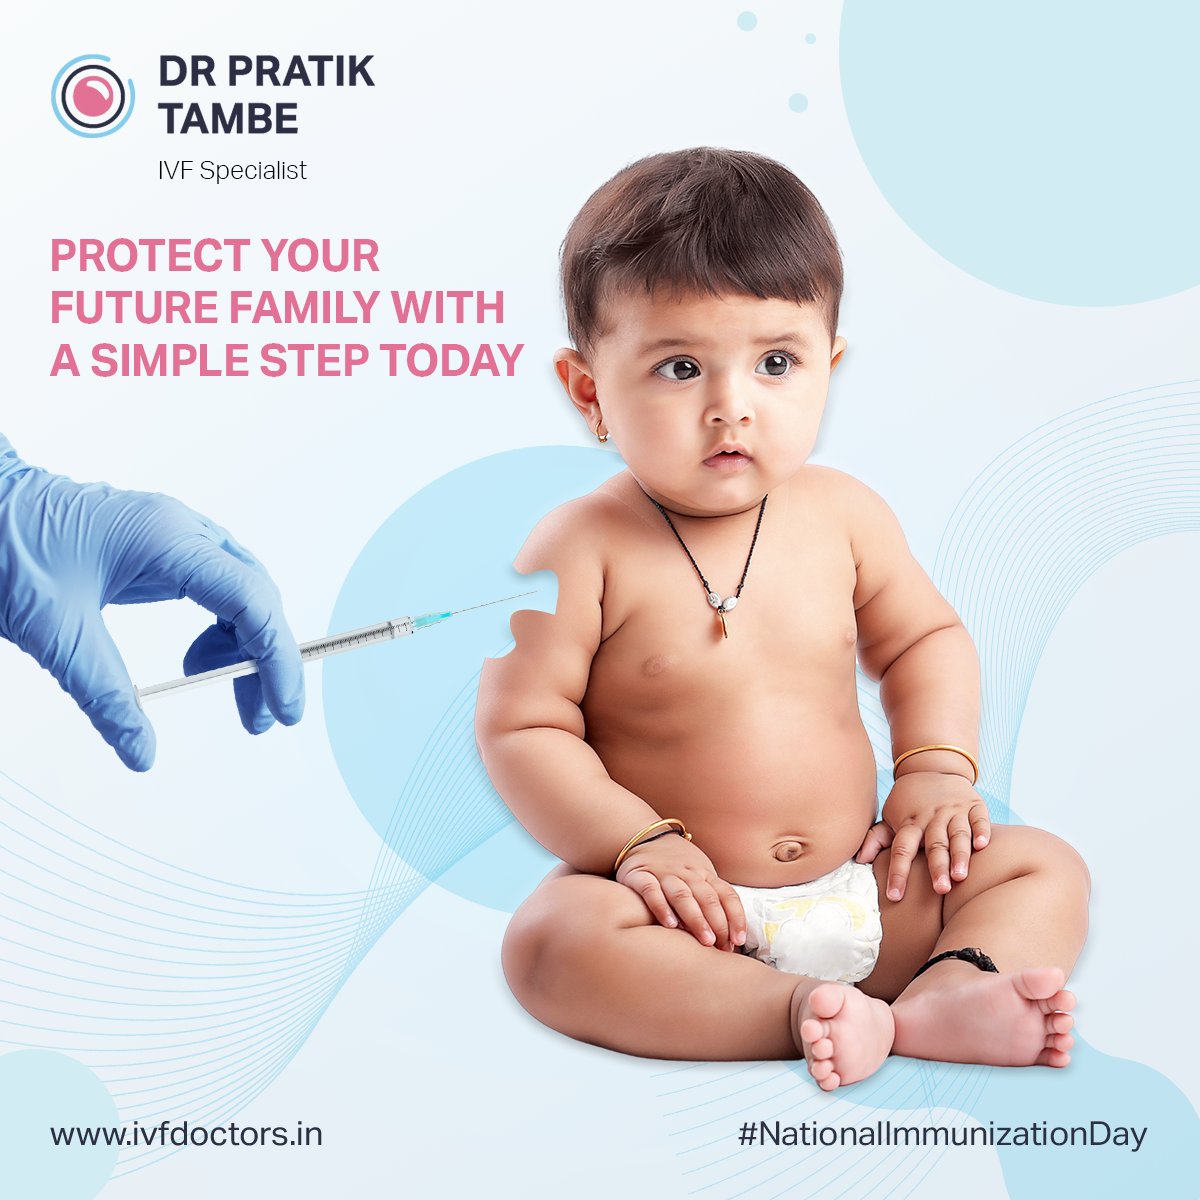 Completing the puzzle of IVF: each step, a piece of the journey. But it's the final piece, 'Immunization', that seals the picture of hope for your future family. Protect their tomorrow with a simple step today. #NationalImmunizationDay #IVF #HealthyFamily #ProtectYourFuture